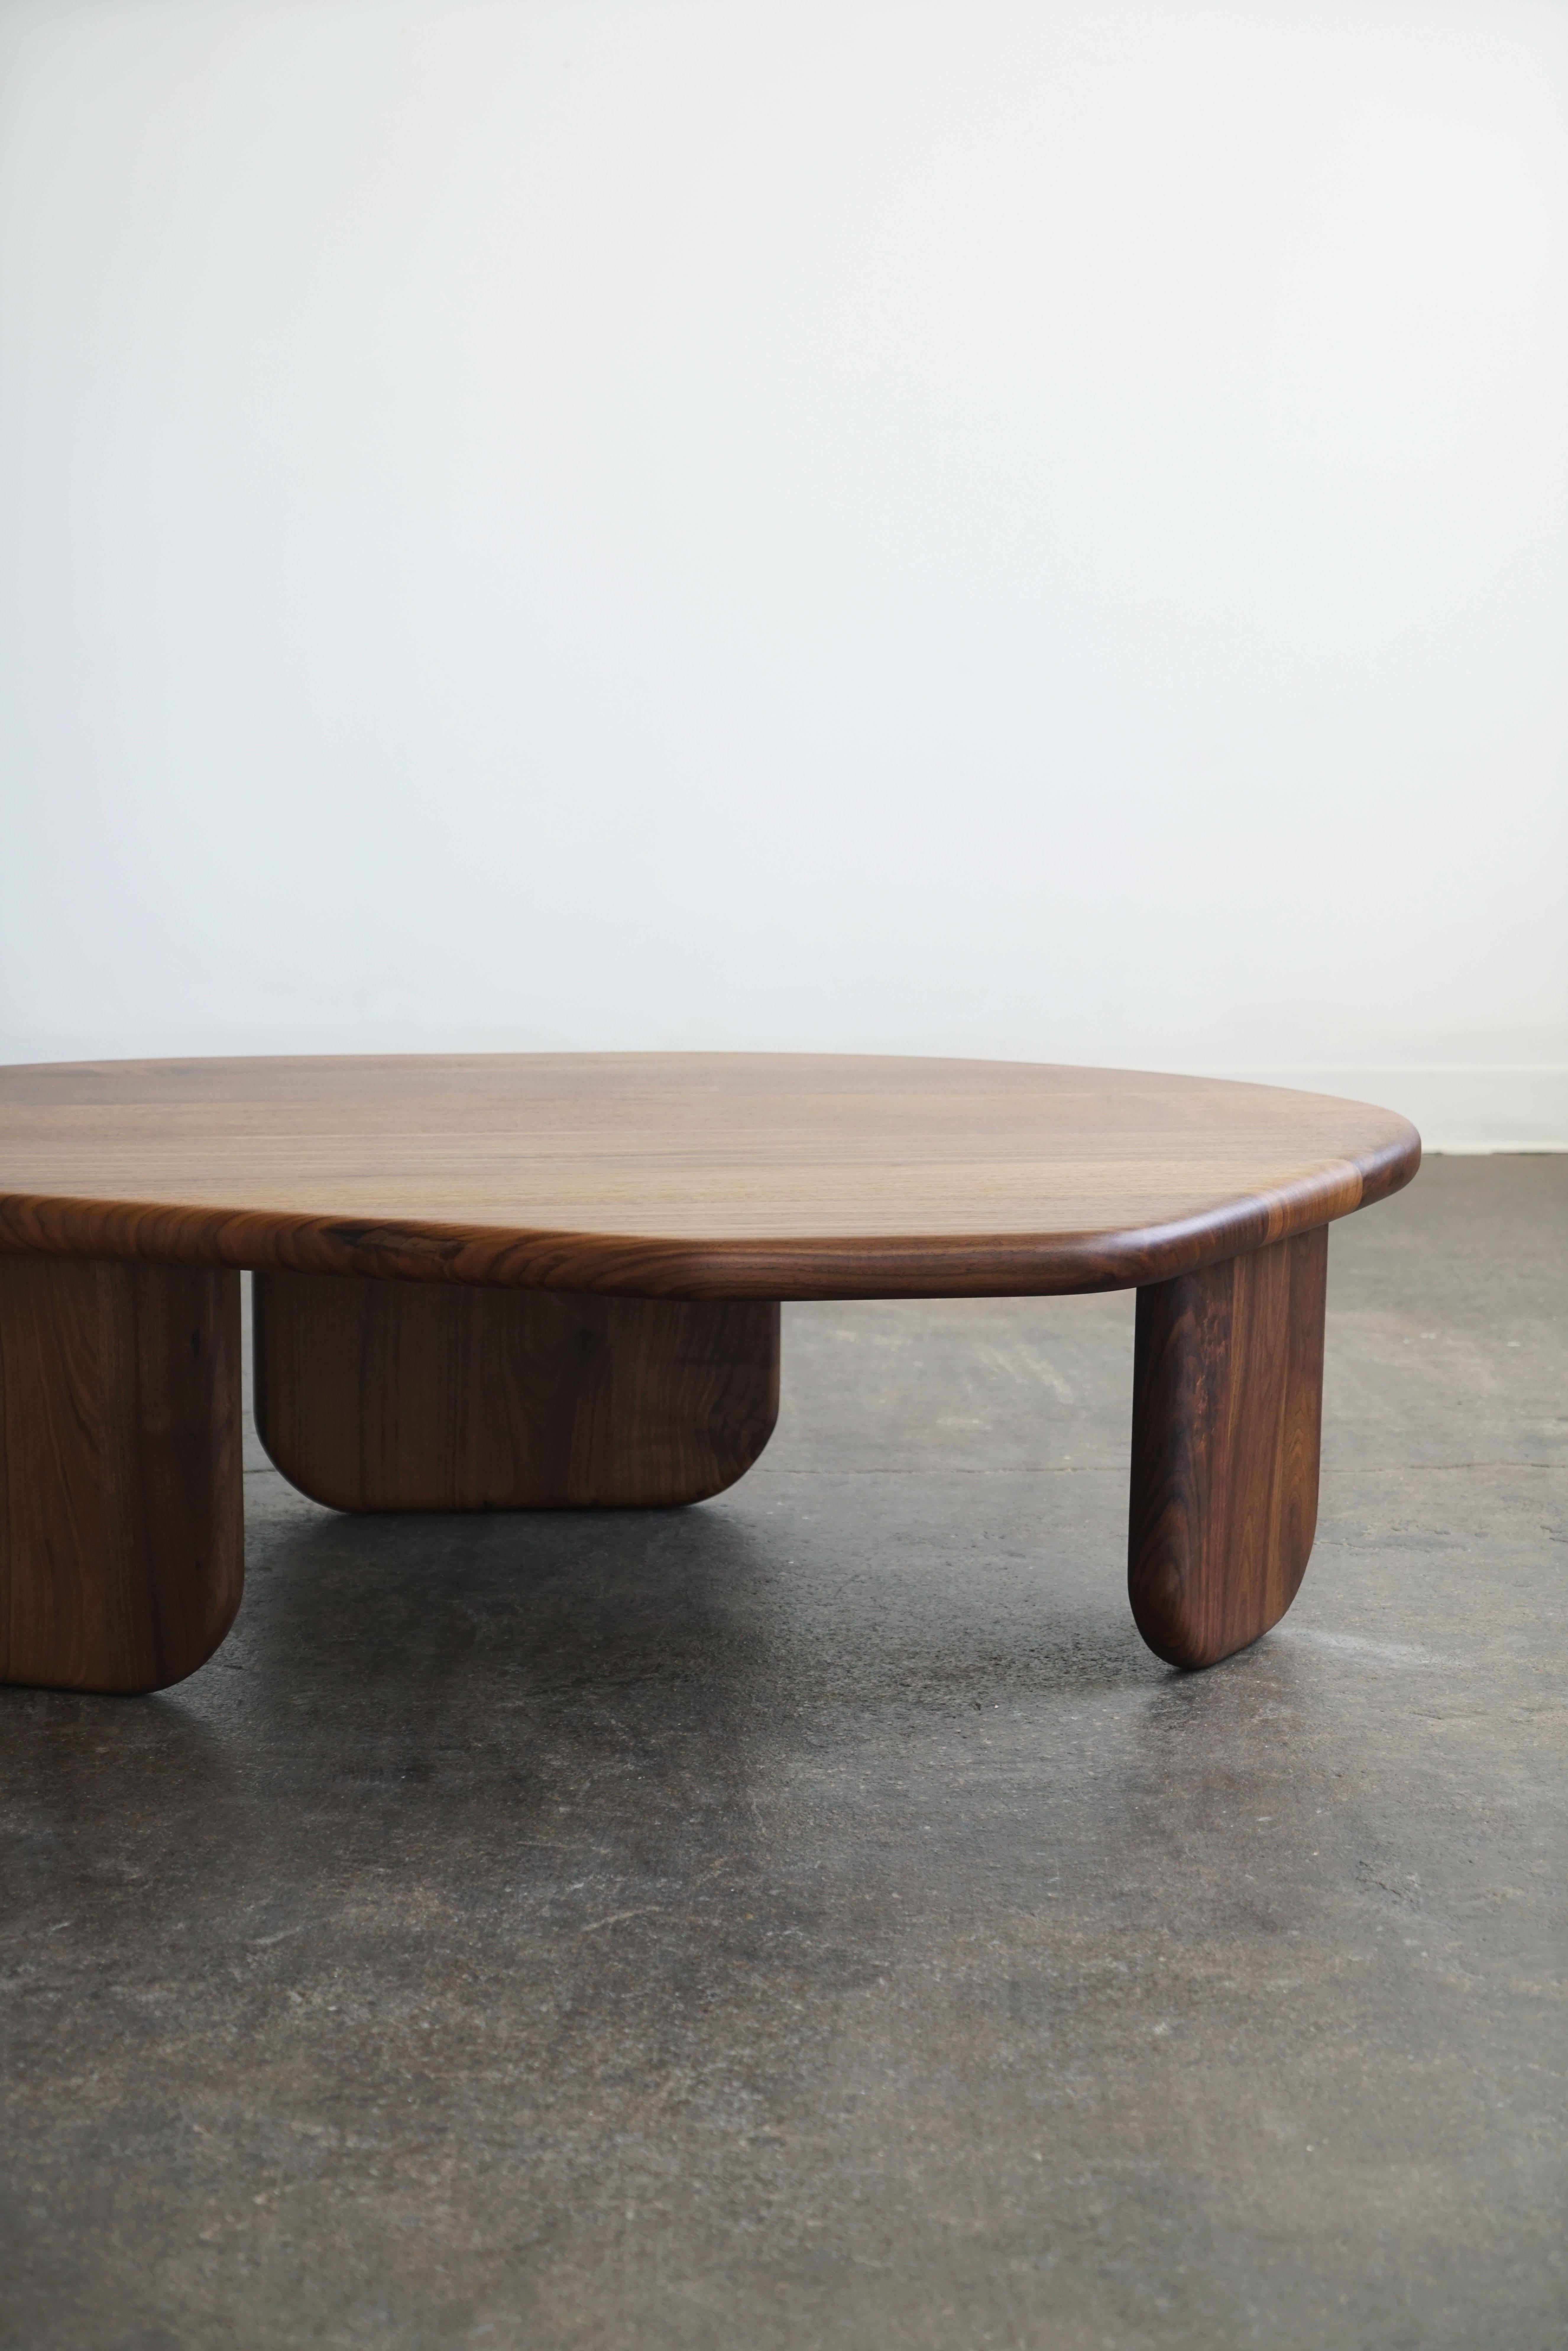 Oiled Organic Shaped Modern Coffee Table by Last Workshop, Walnut For Sale